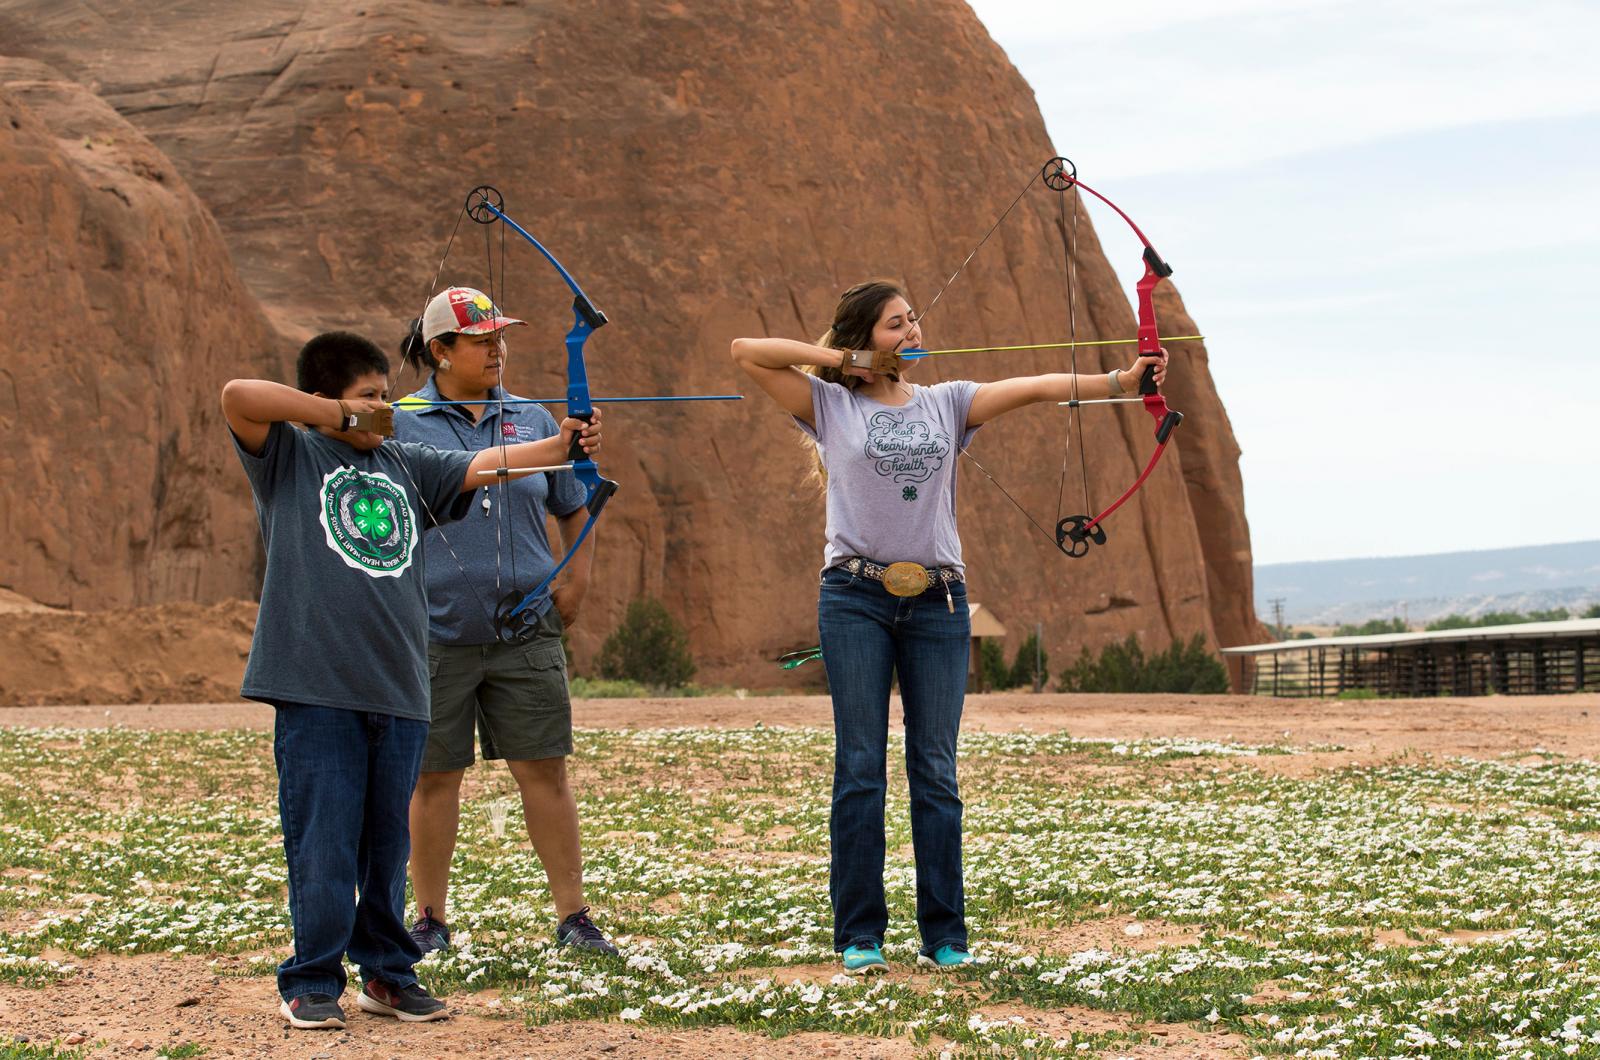 shooting sports leader watches as boy and girl take aim with recurve bow